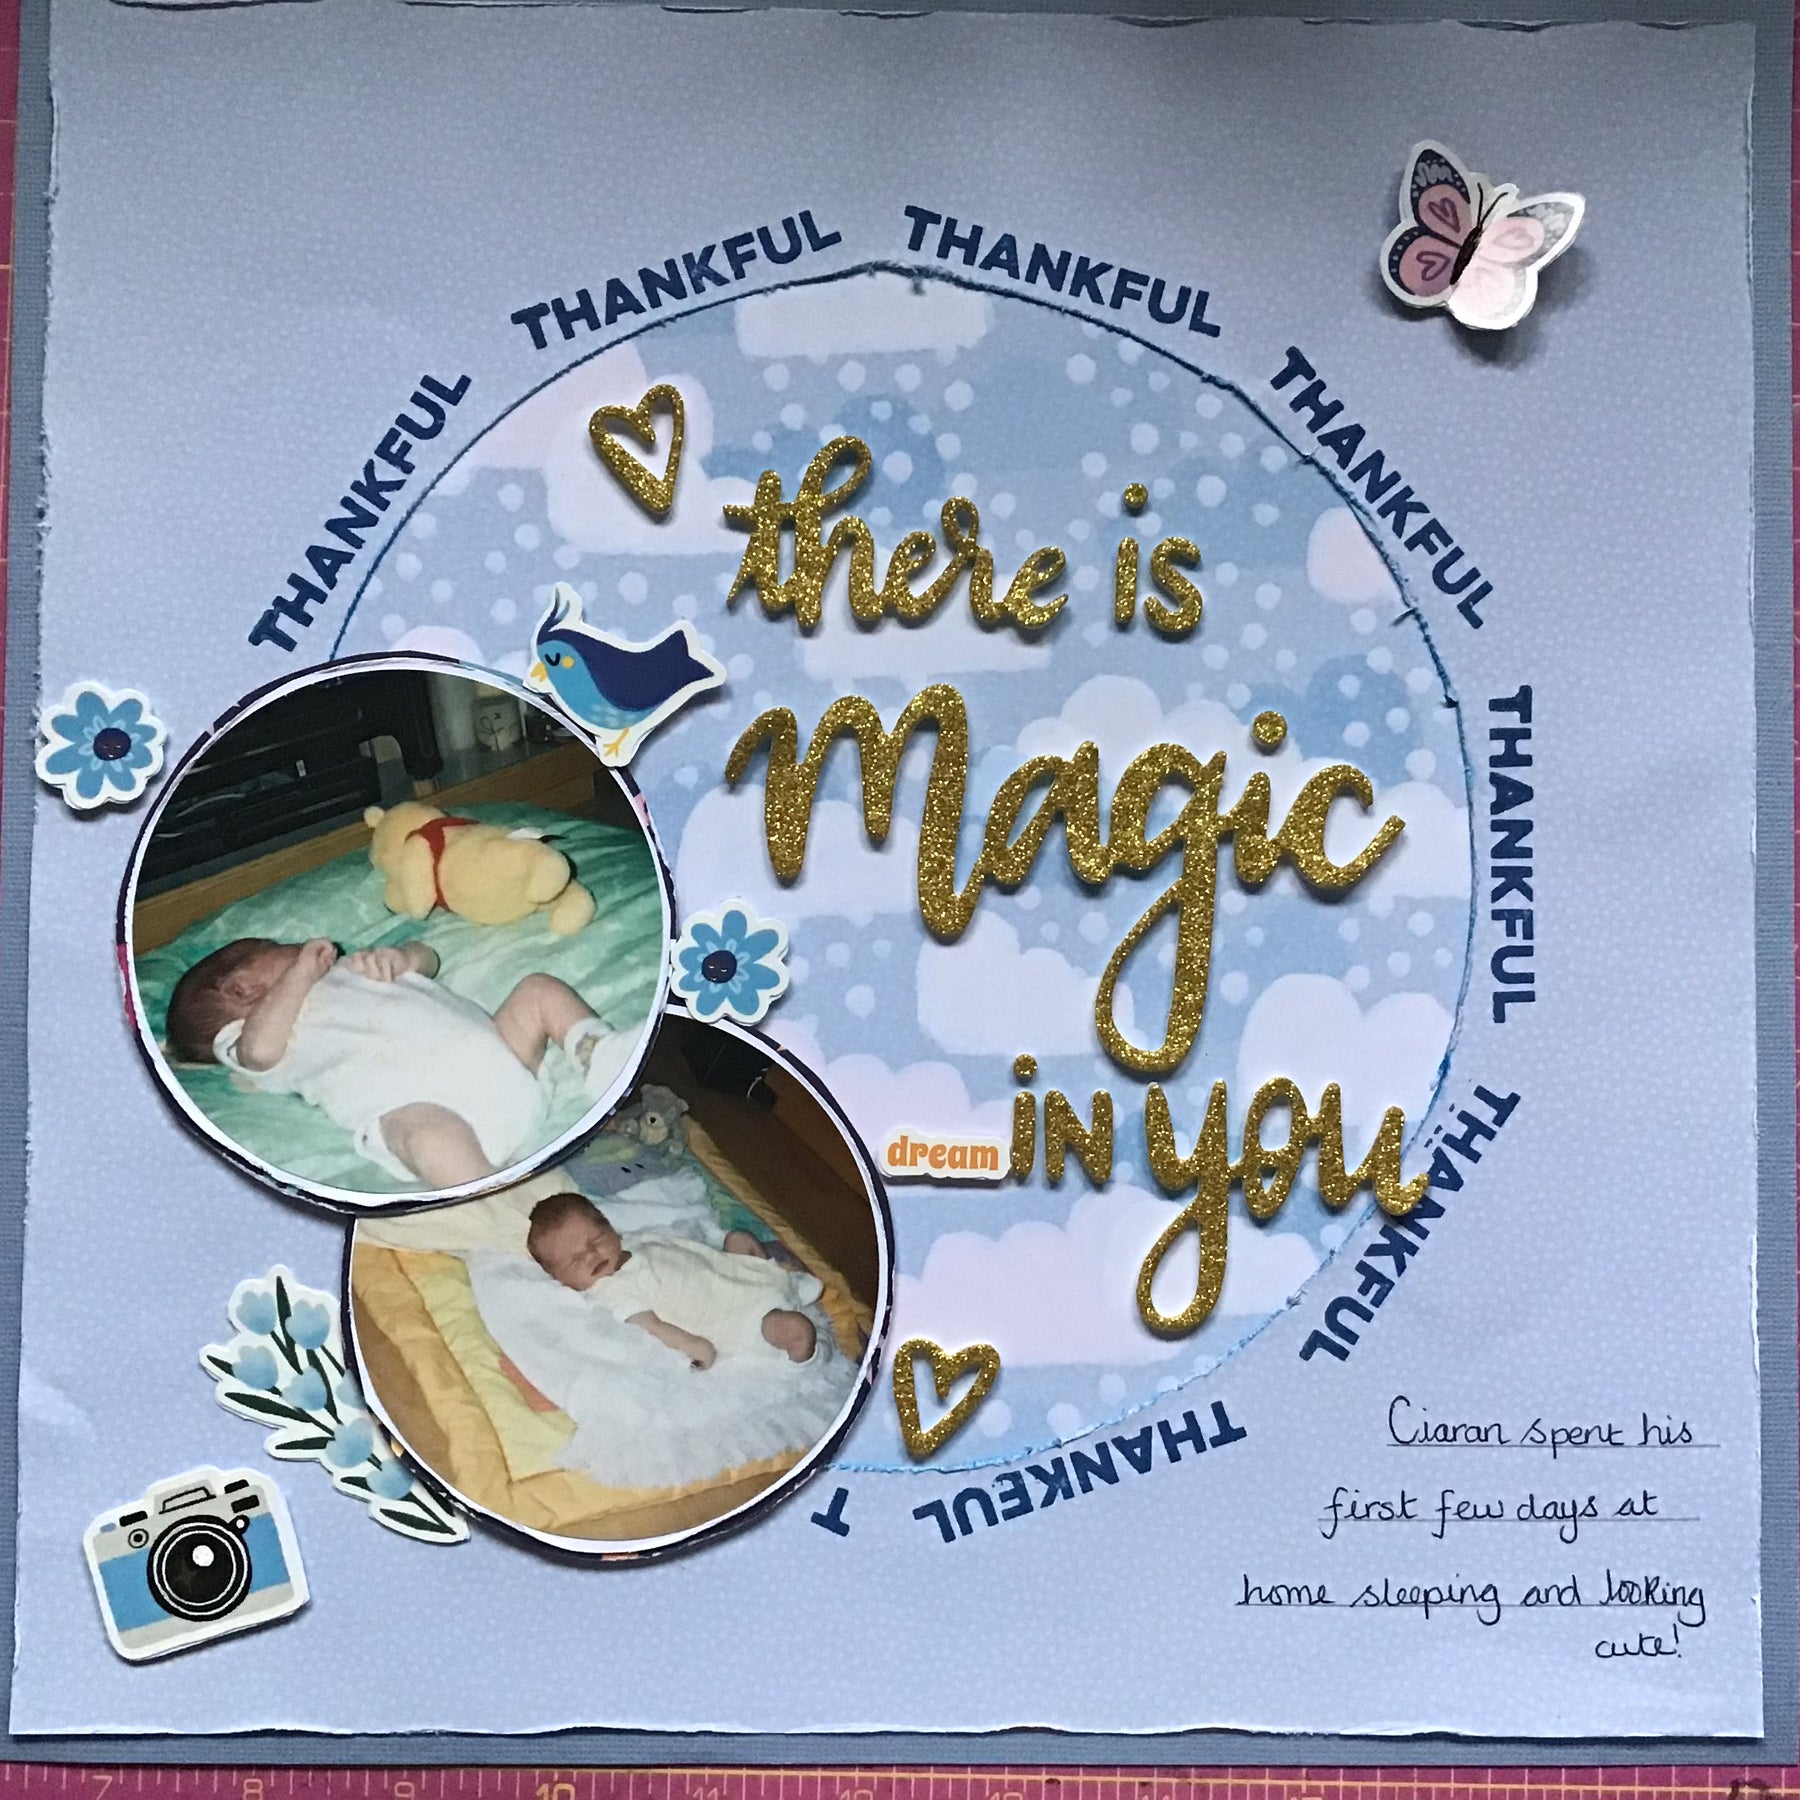 There is Magic in You by Kerry Mcinally